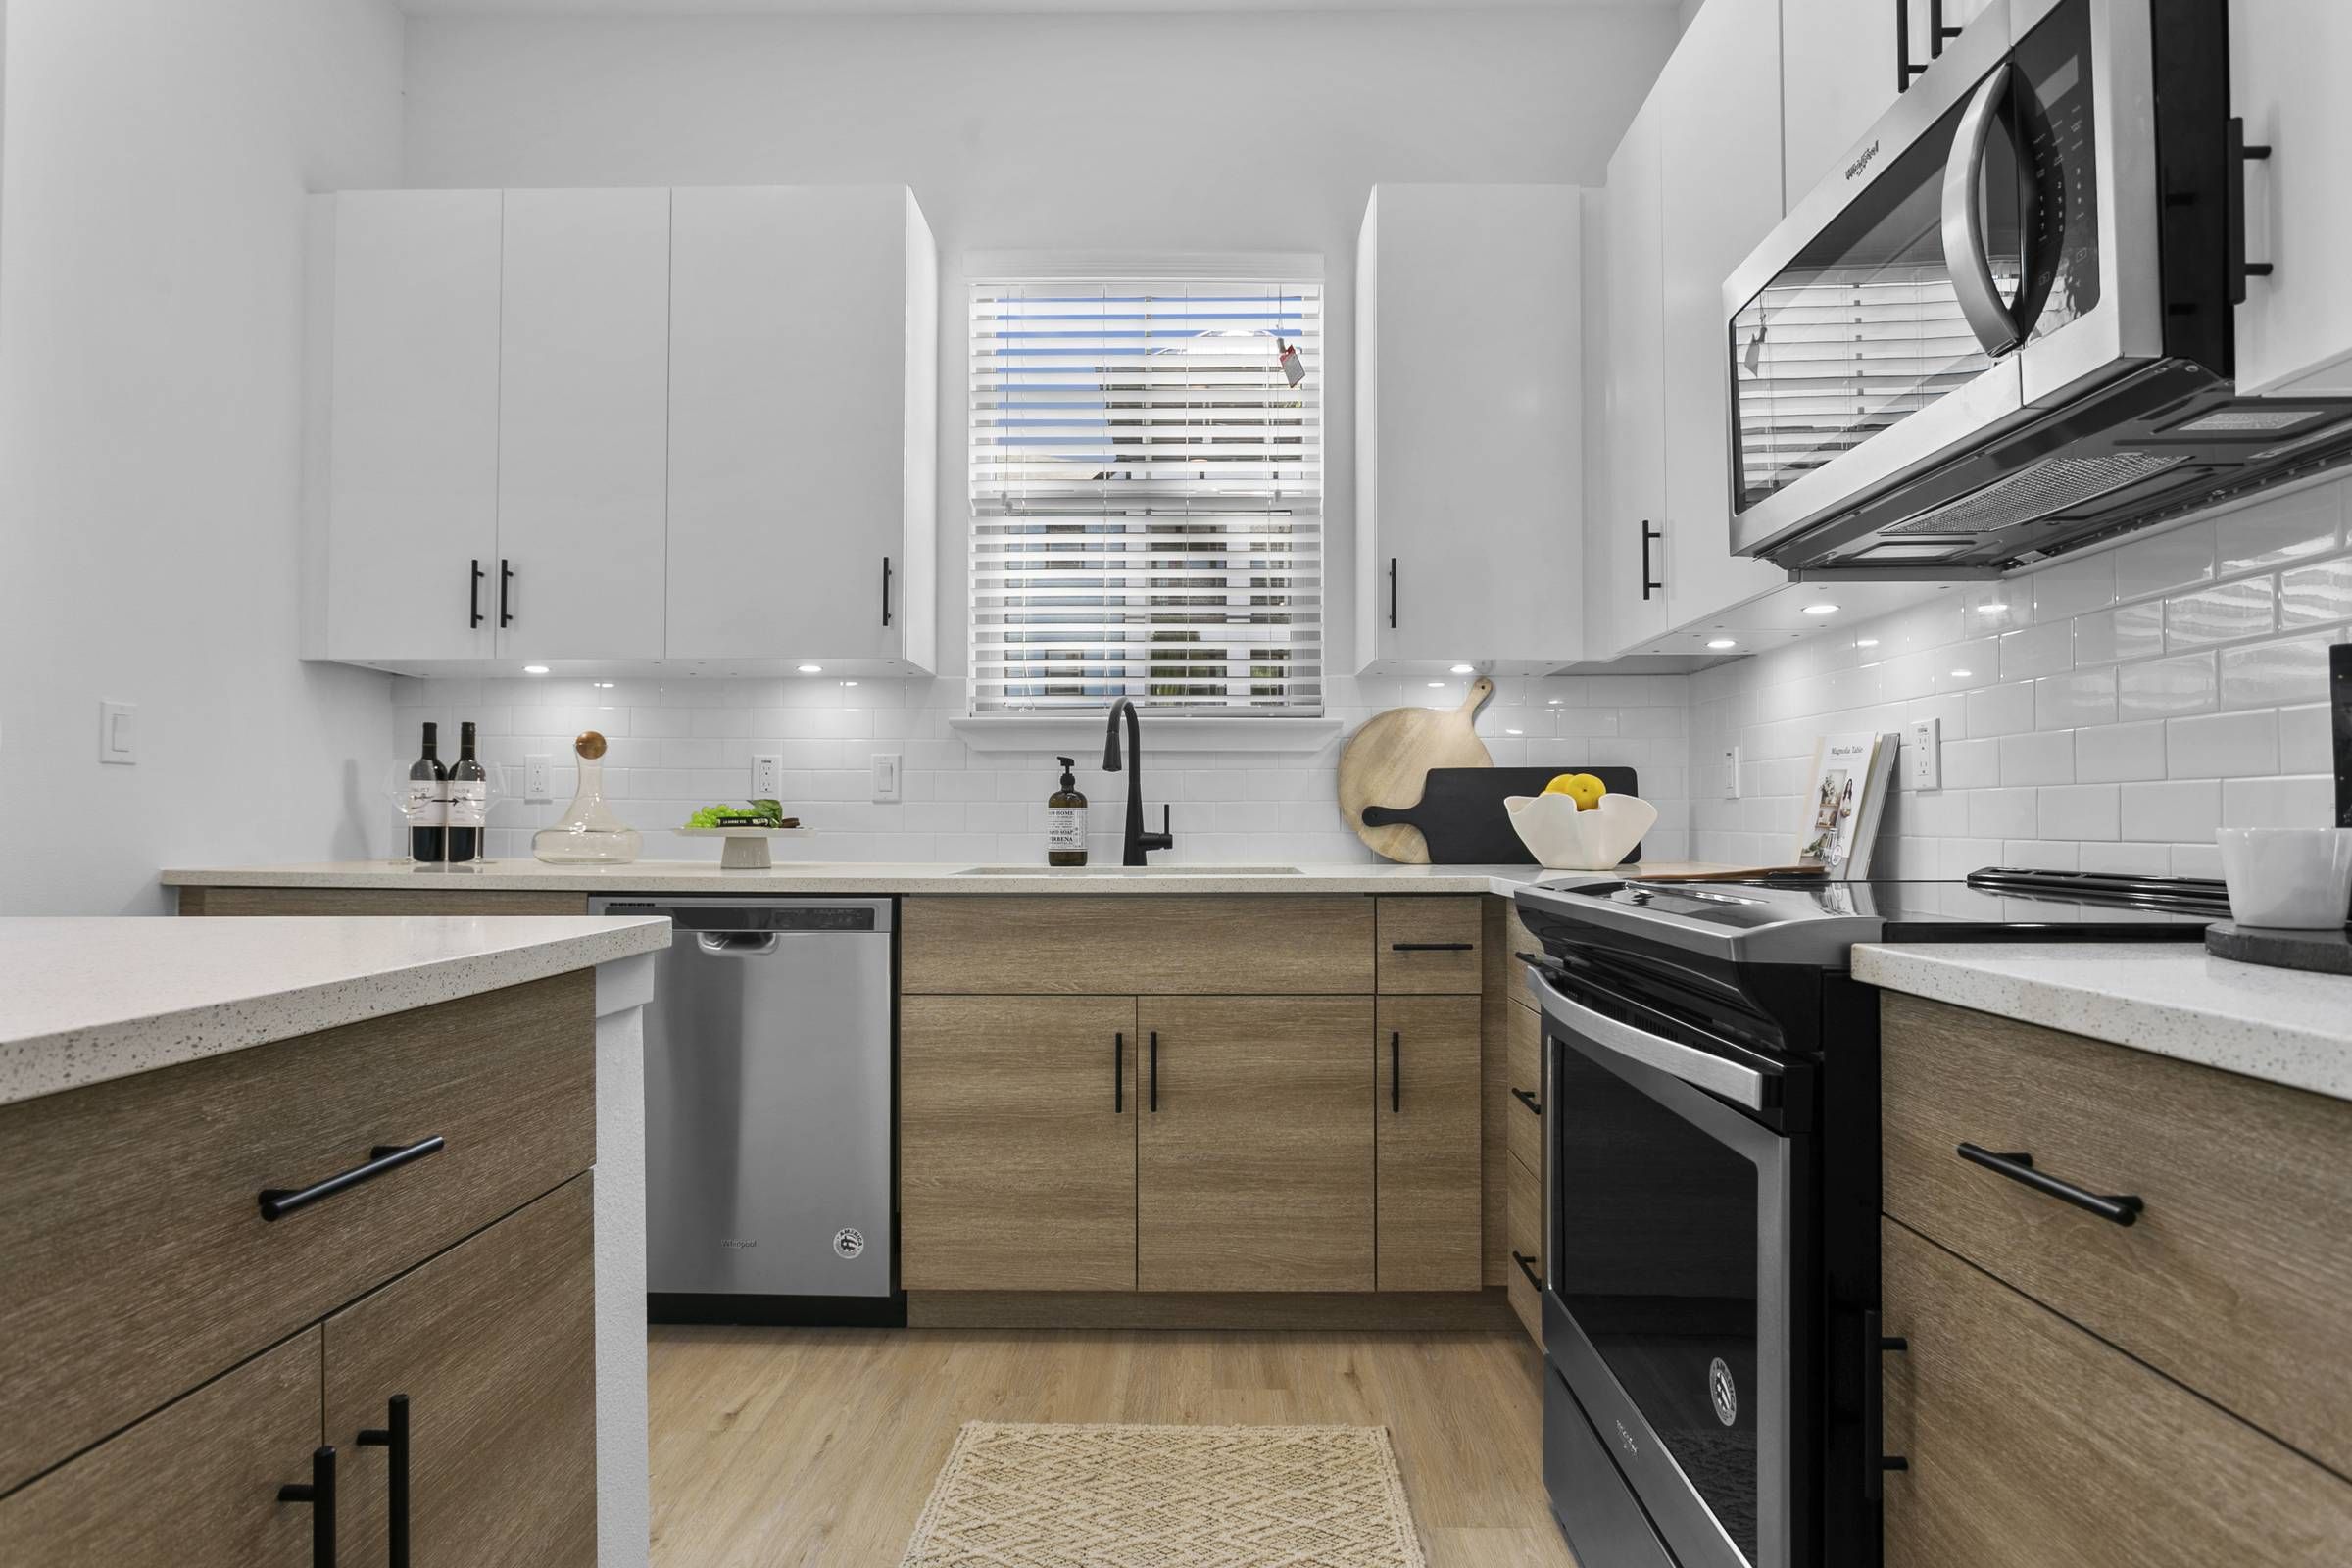 A well-lit kitchen with sleek cabinetry and stainless steel appliances at Alta Clearwater.